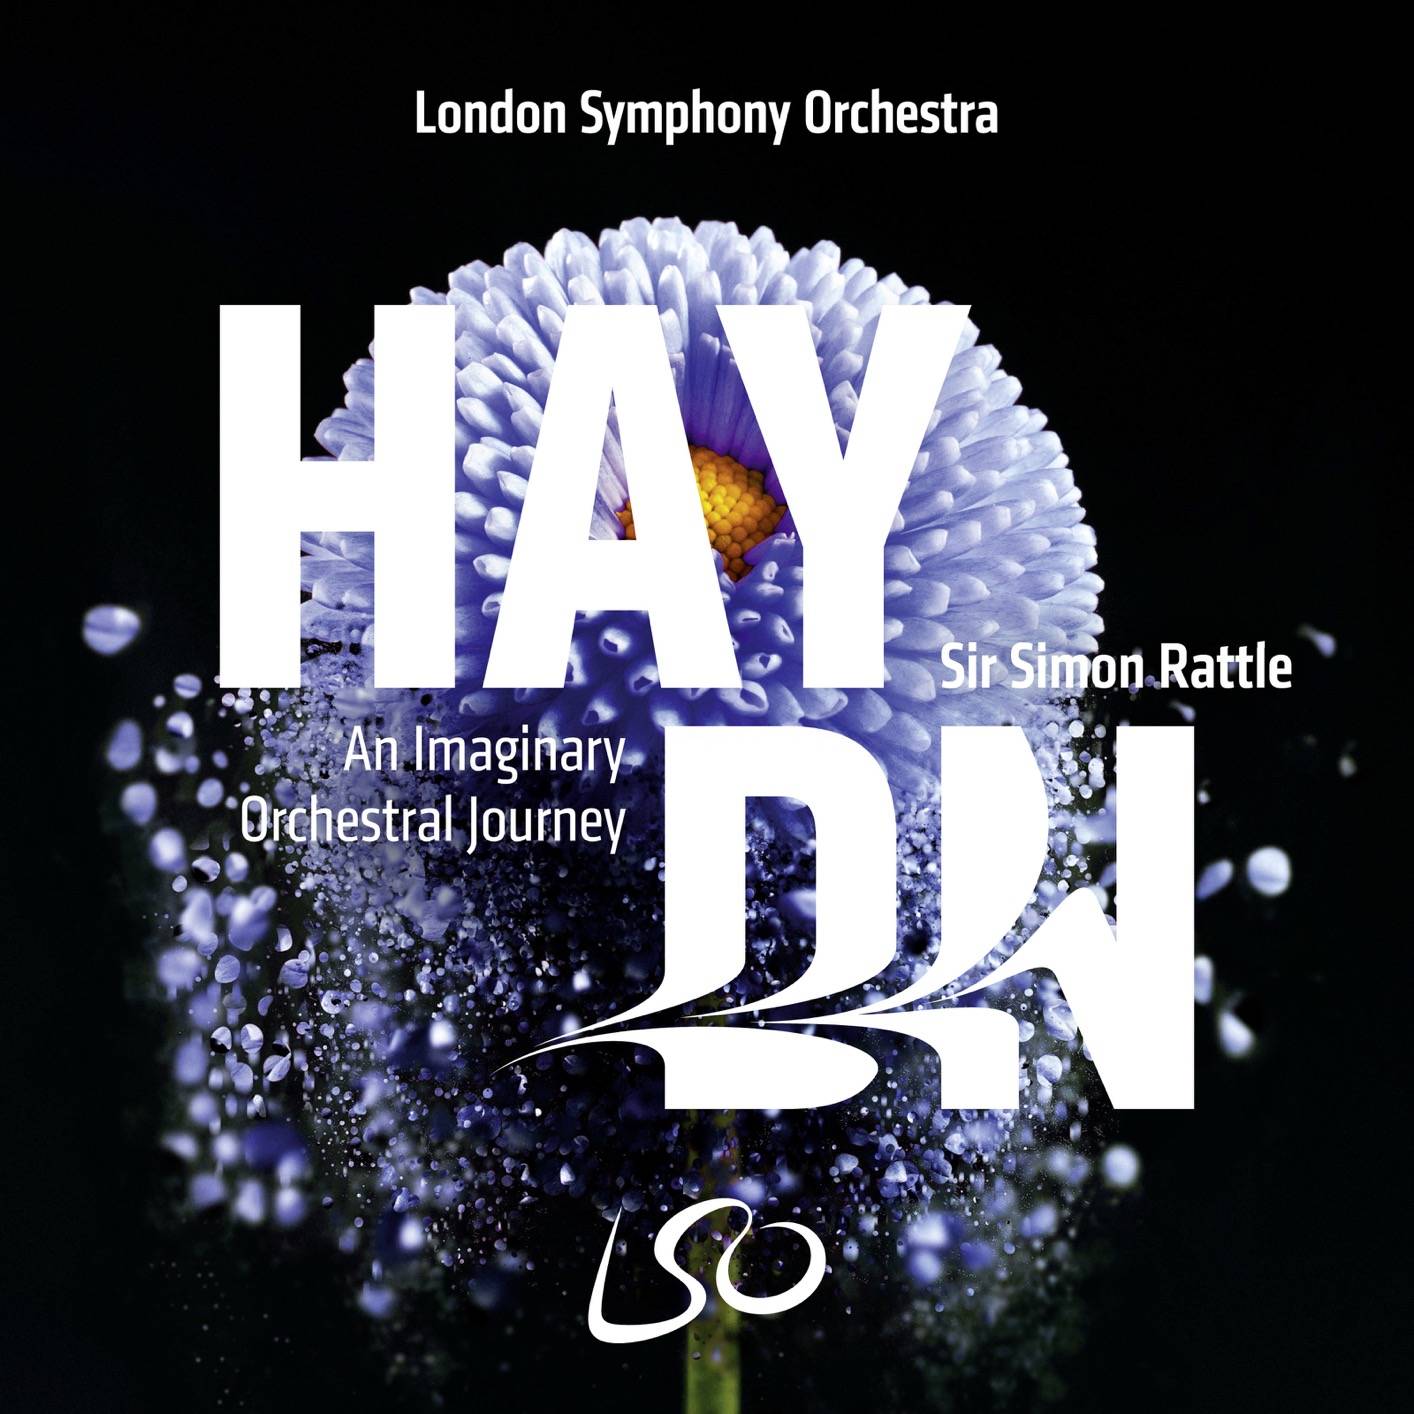 Sir Simon Rattle & London Symphony Orchestra - Haydn: An Imaginary Orchestral Journey (2018) [DSF DSD64/2.82MHz + FLAC 24bit/96kHz]